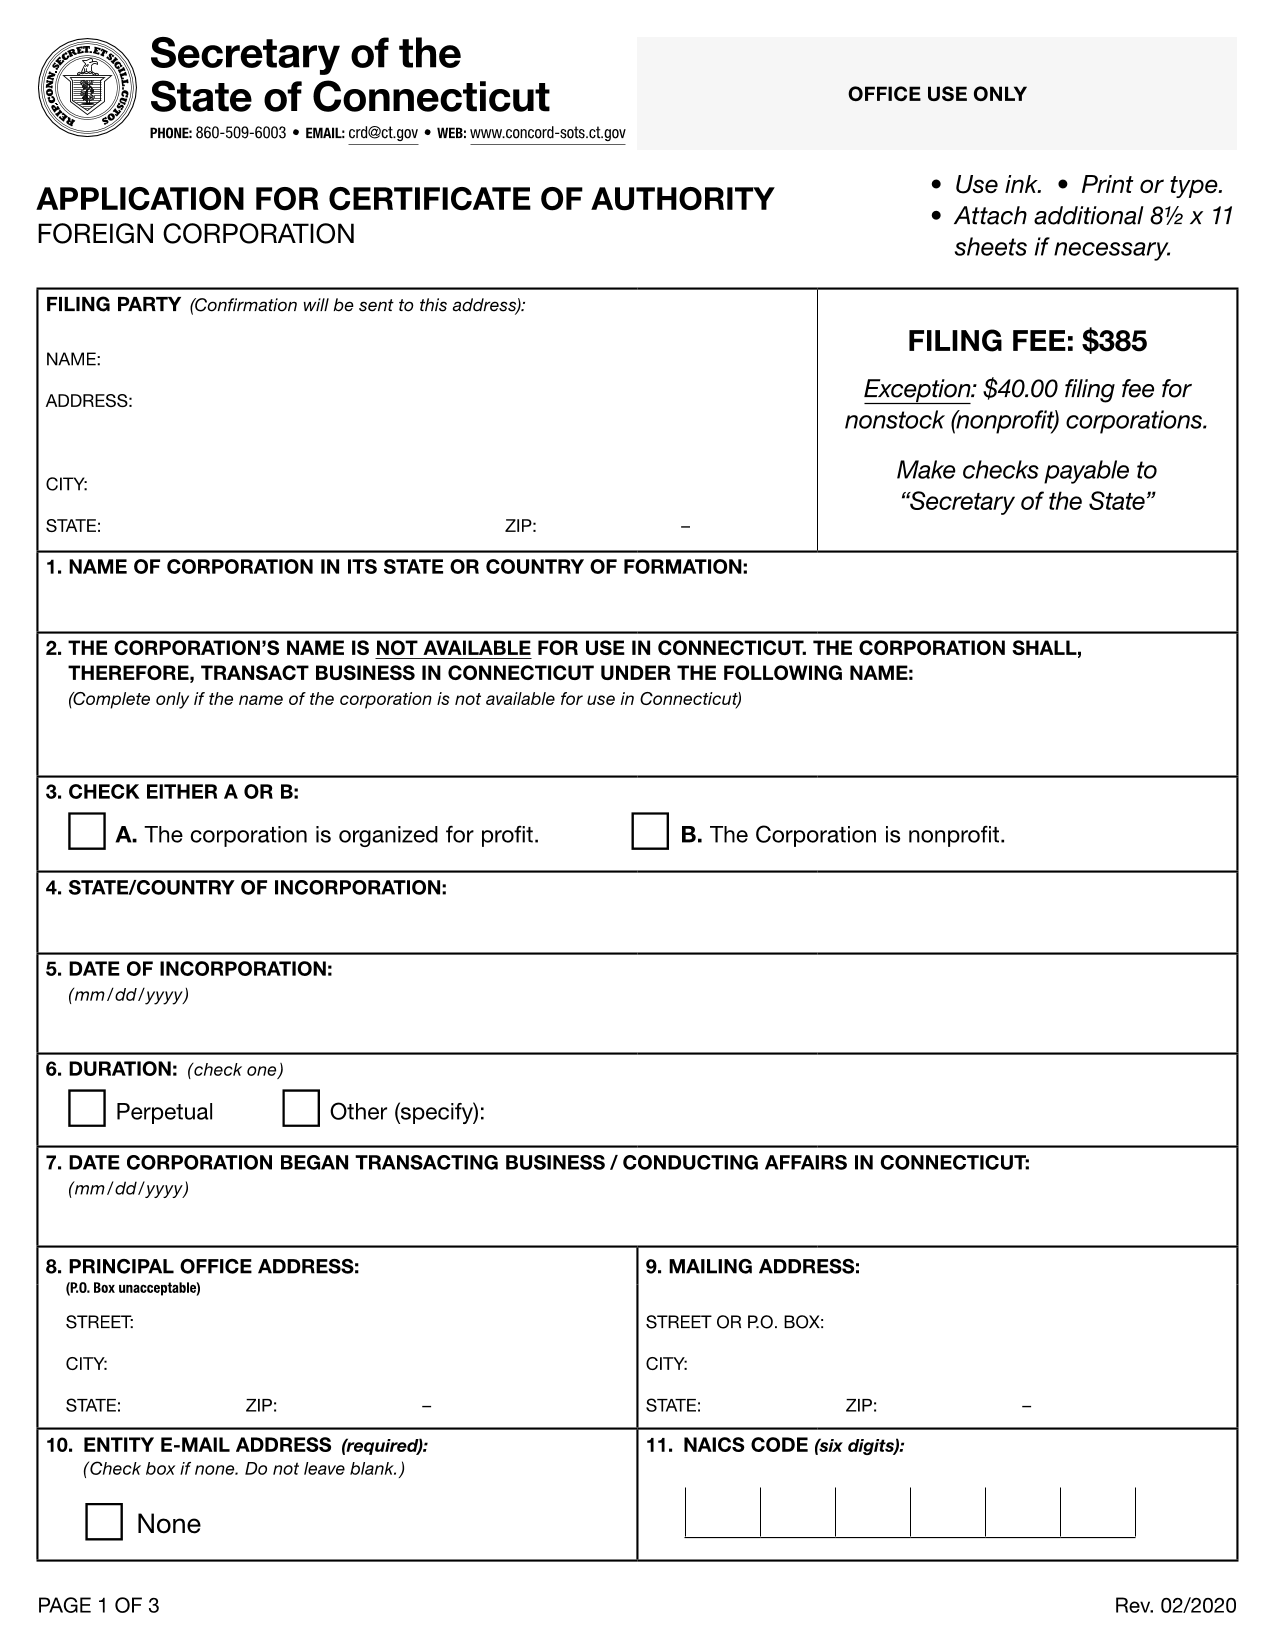 connecticut-foreign-corporation-application-for-certificate-of-authority-